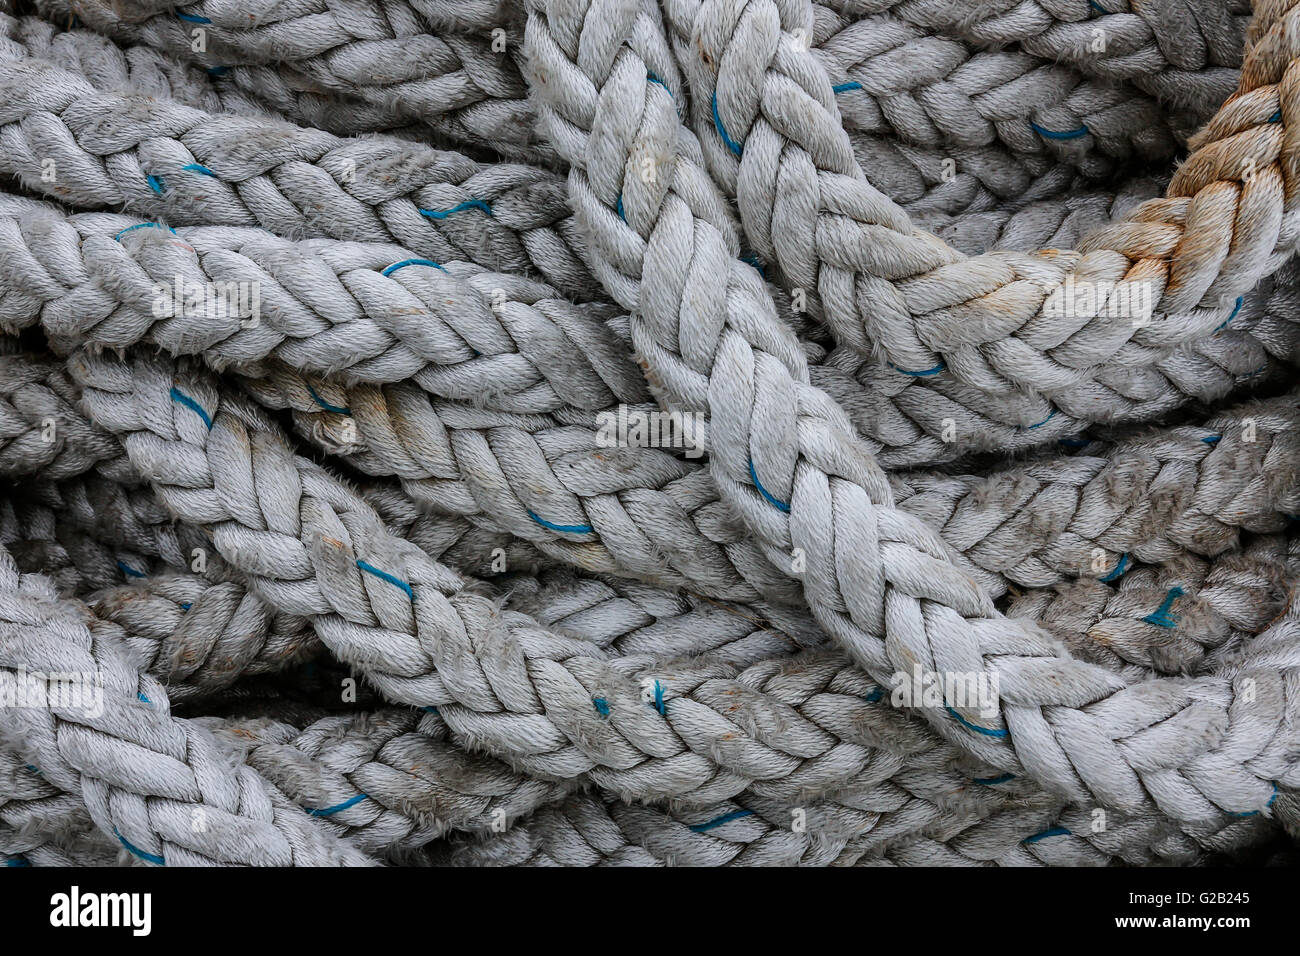 Coils of strong rope Stock Photo